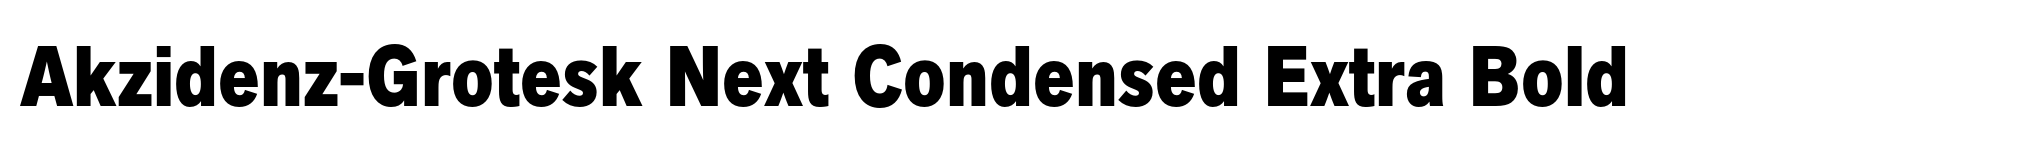 Akzidenz-Grotesk Next Condensed Extra Bold image